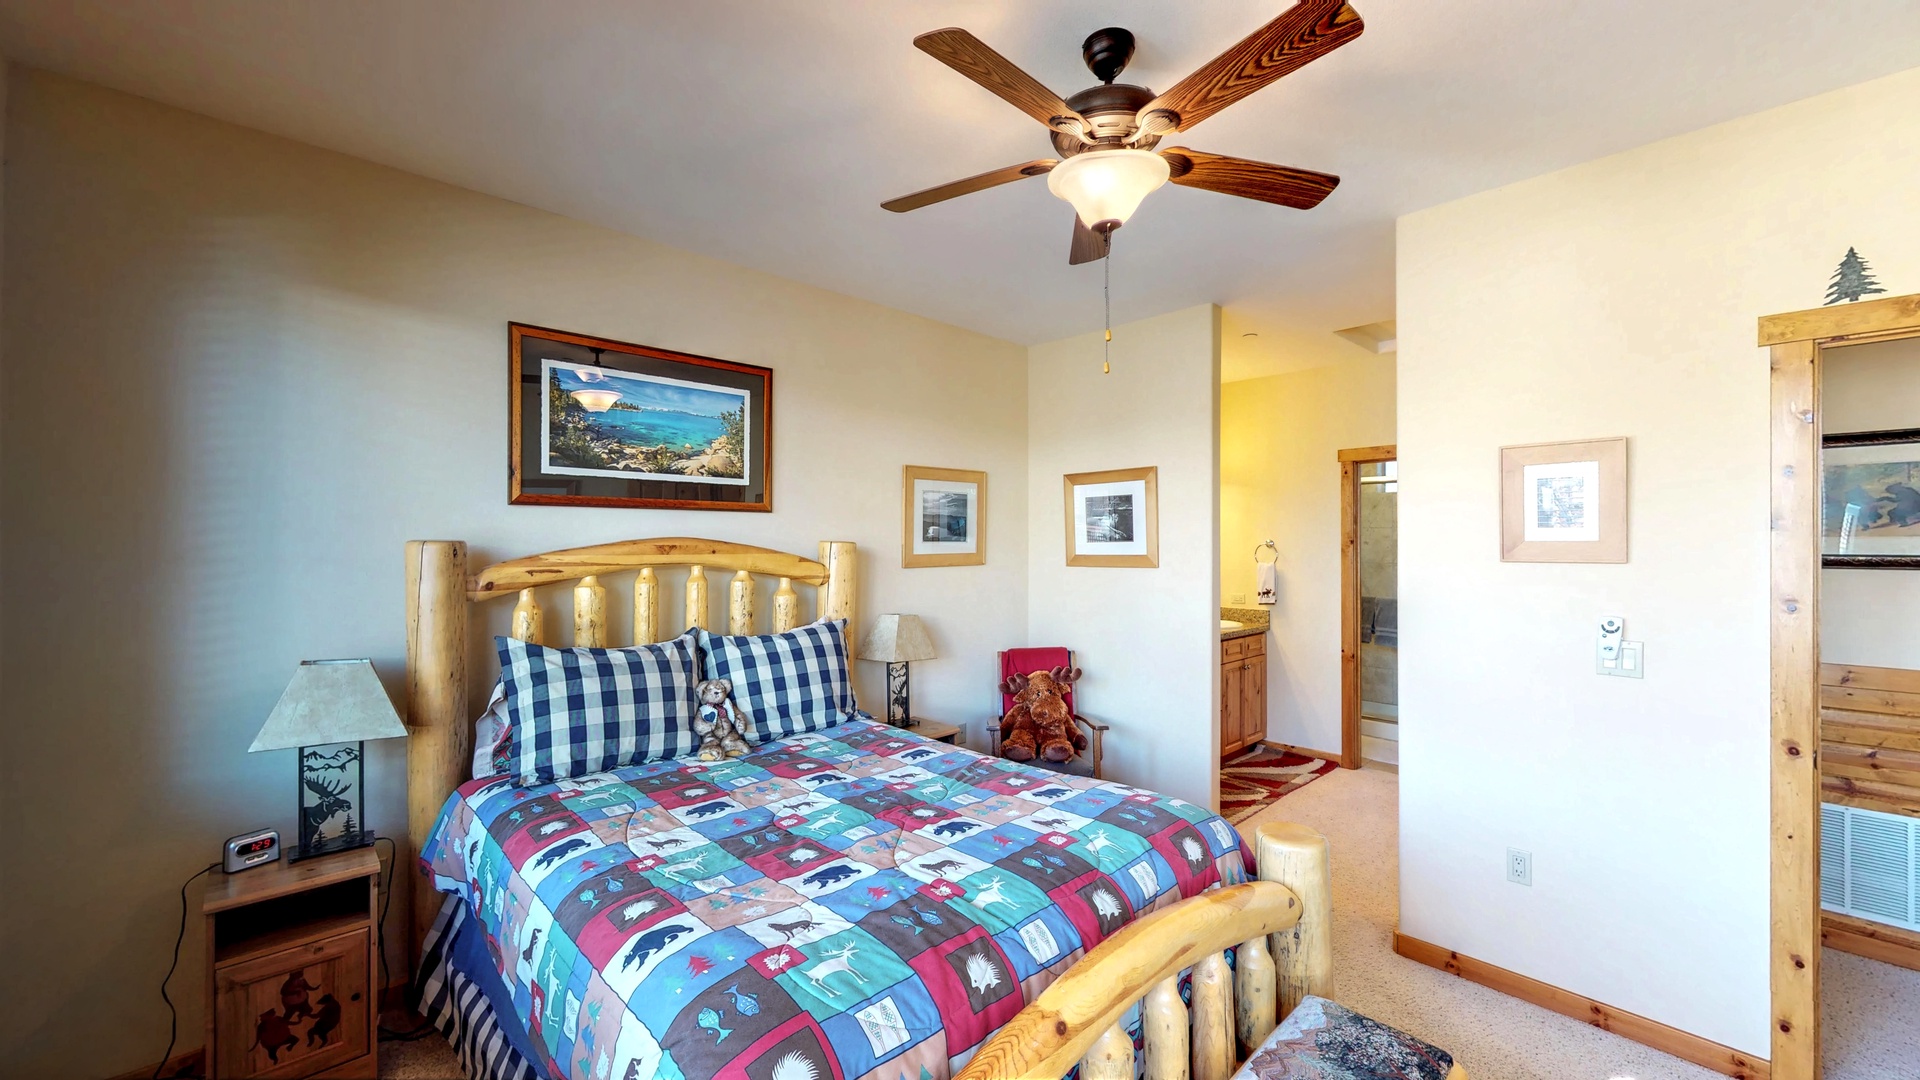 Bedroom with one bed~ nearby bathroom and ceiling fan: Truckee Cinnabar Vacation Retreat